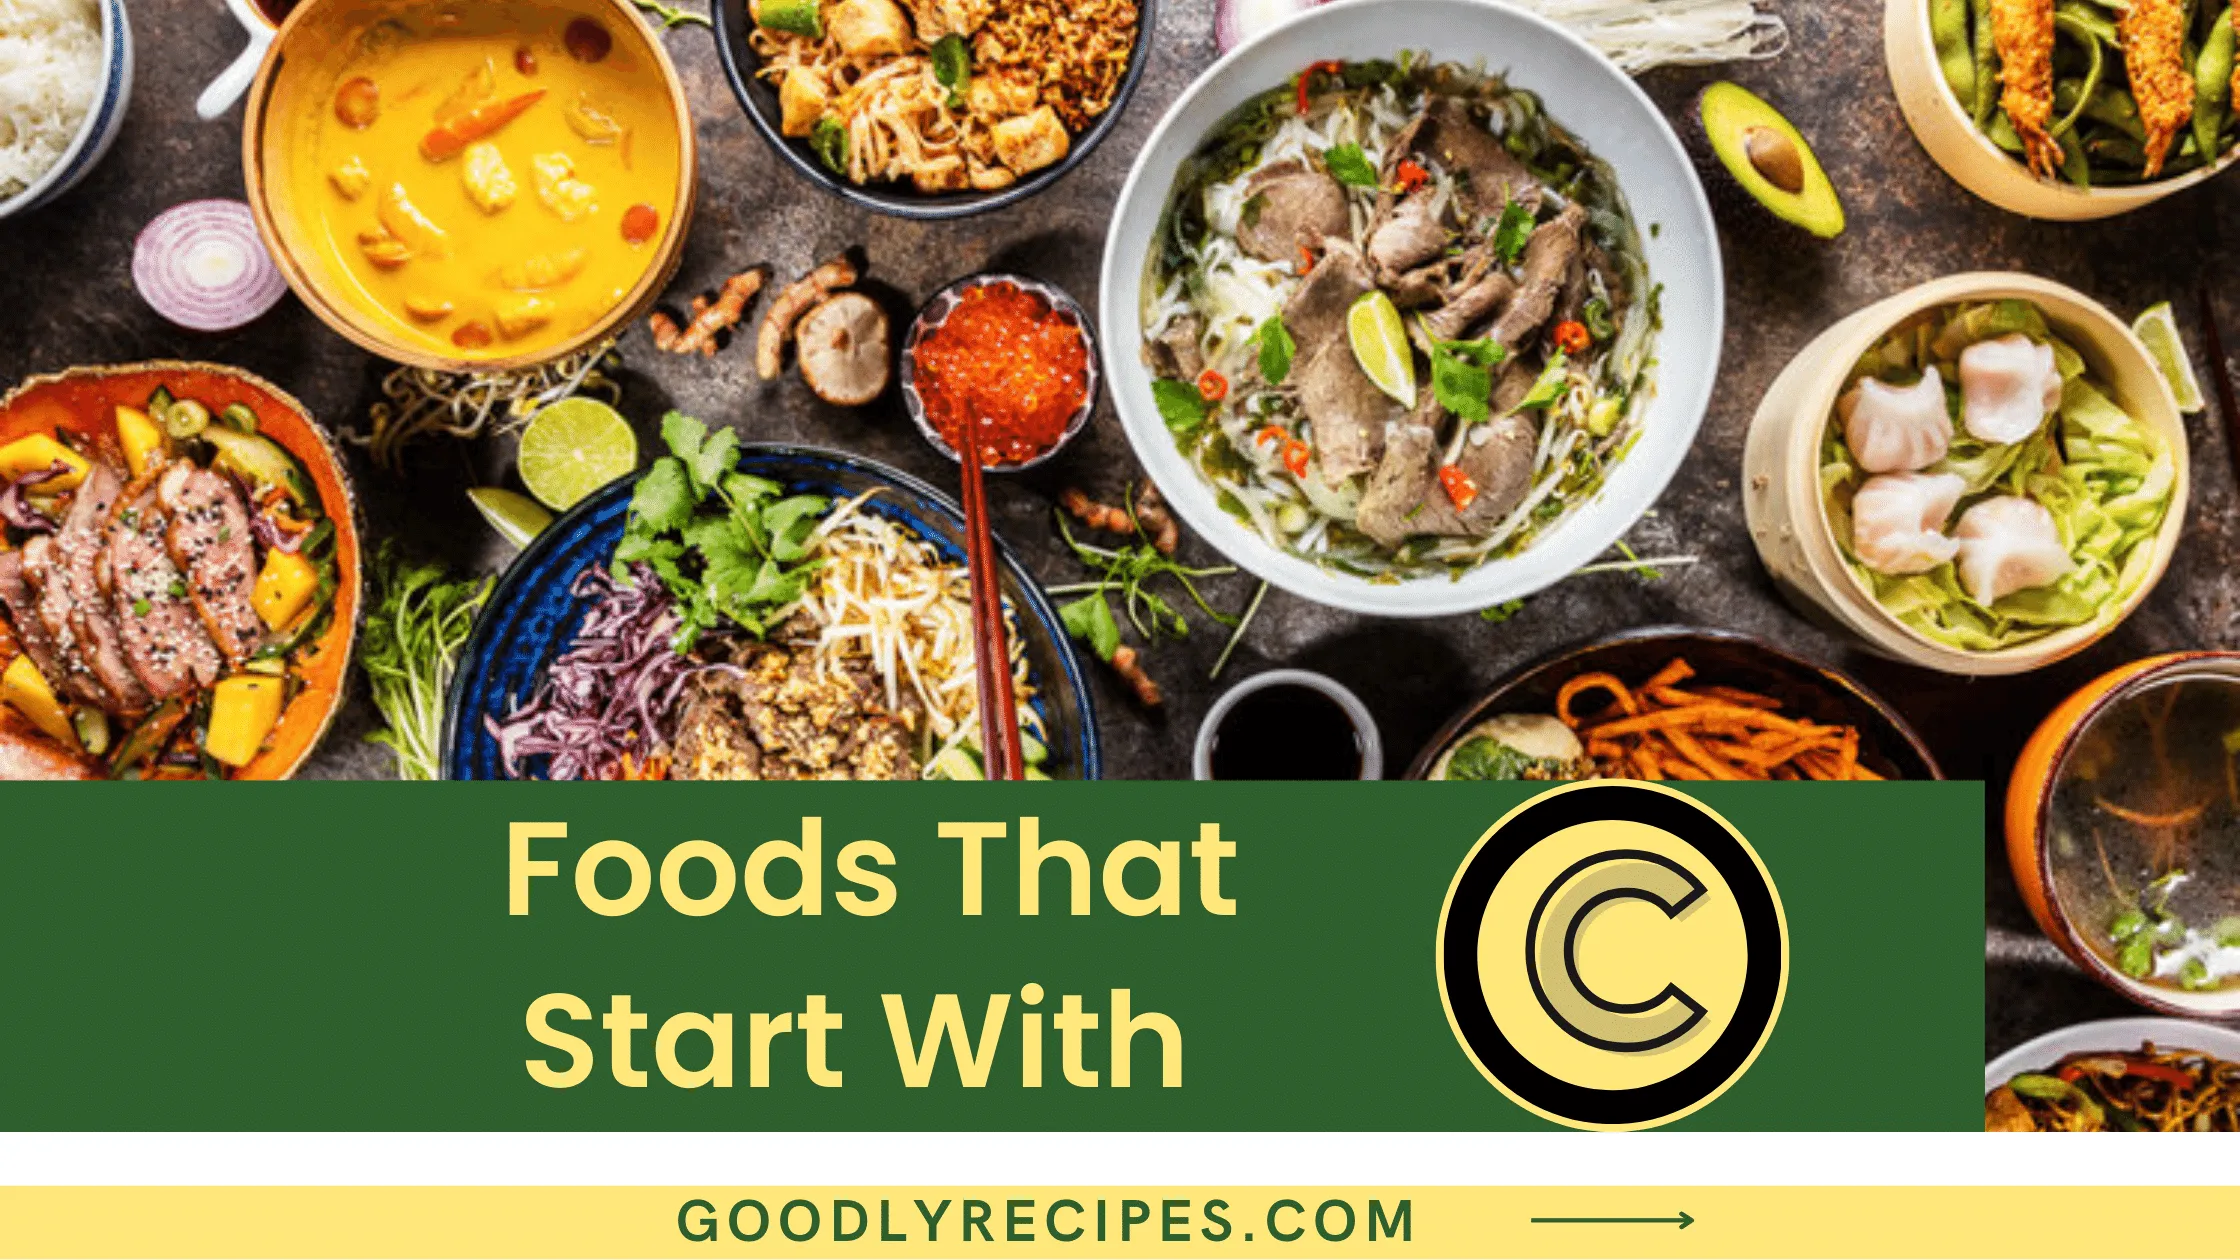 Foods That Start With C - Special Dishes